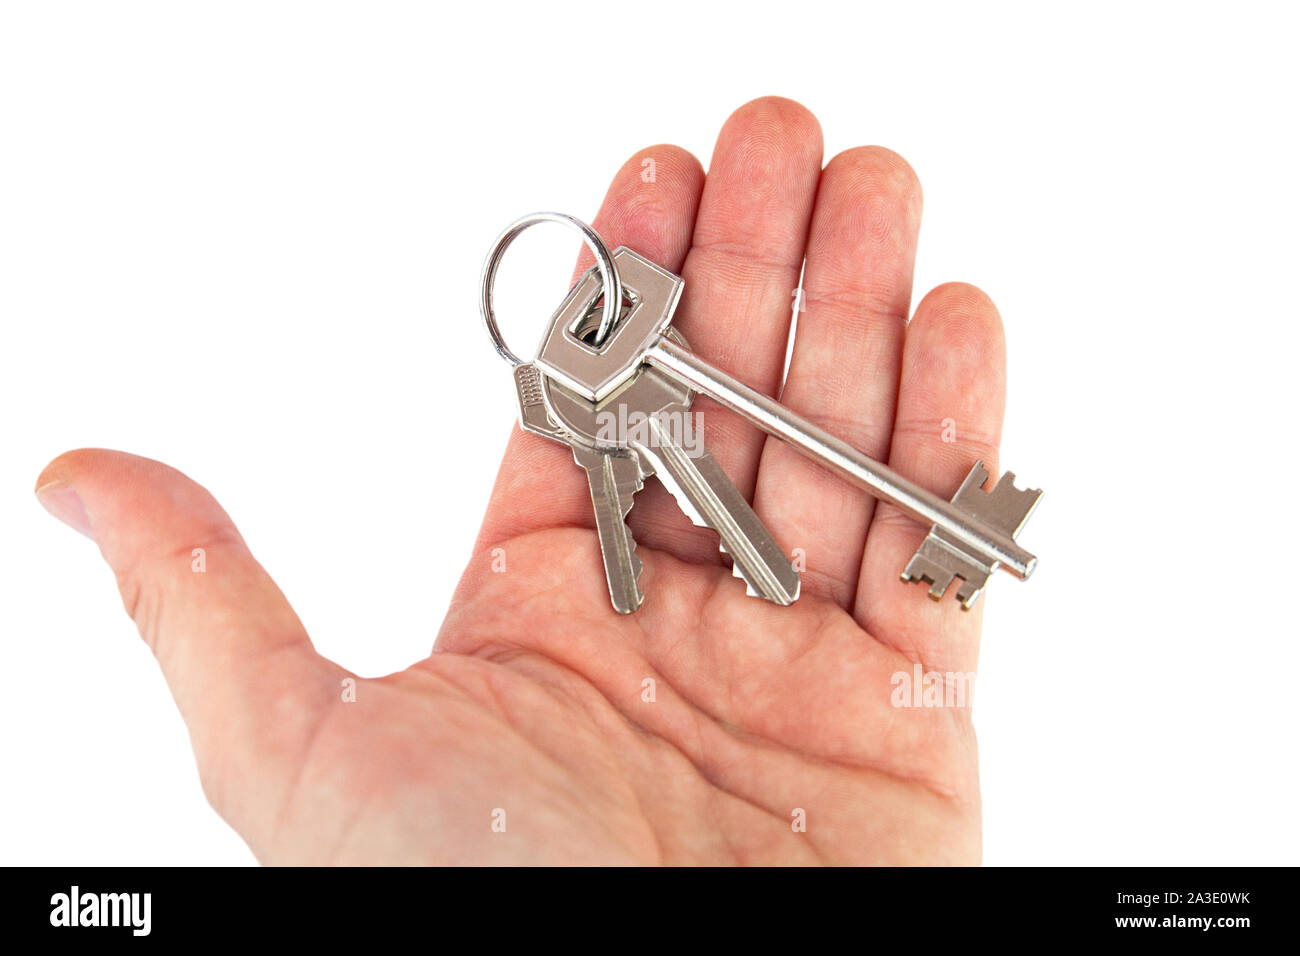 A hand with a bunch of keys. A hand delivers a bunch of keys on a white background. Stock Photo